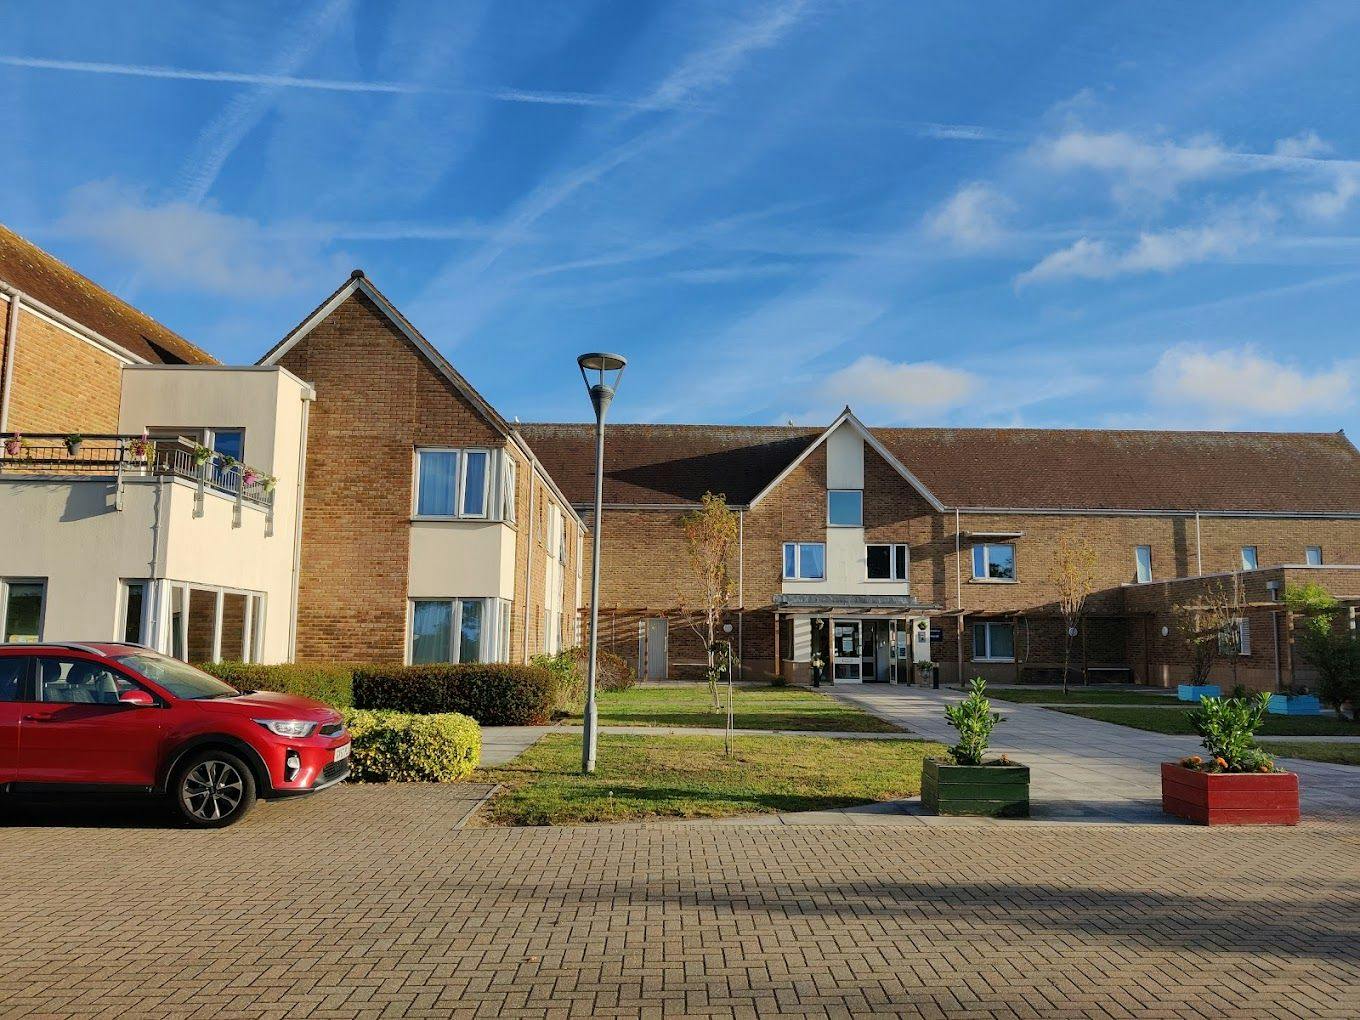 New Elmcroft care home in Shoreham-by-Sea 1